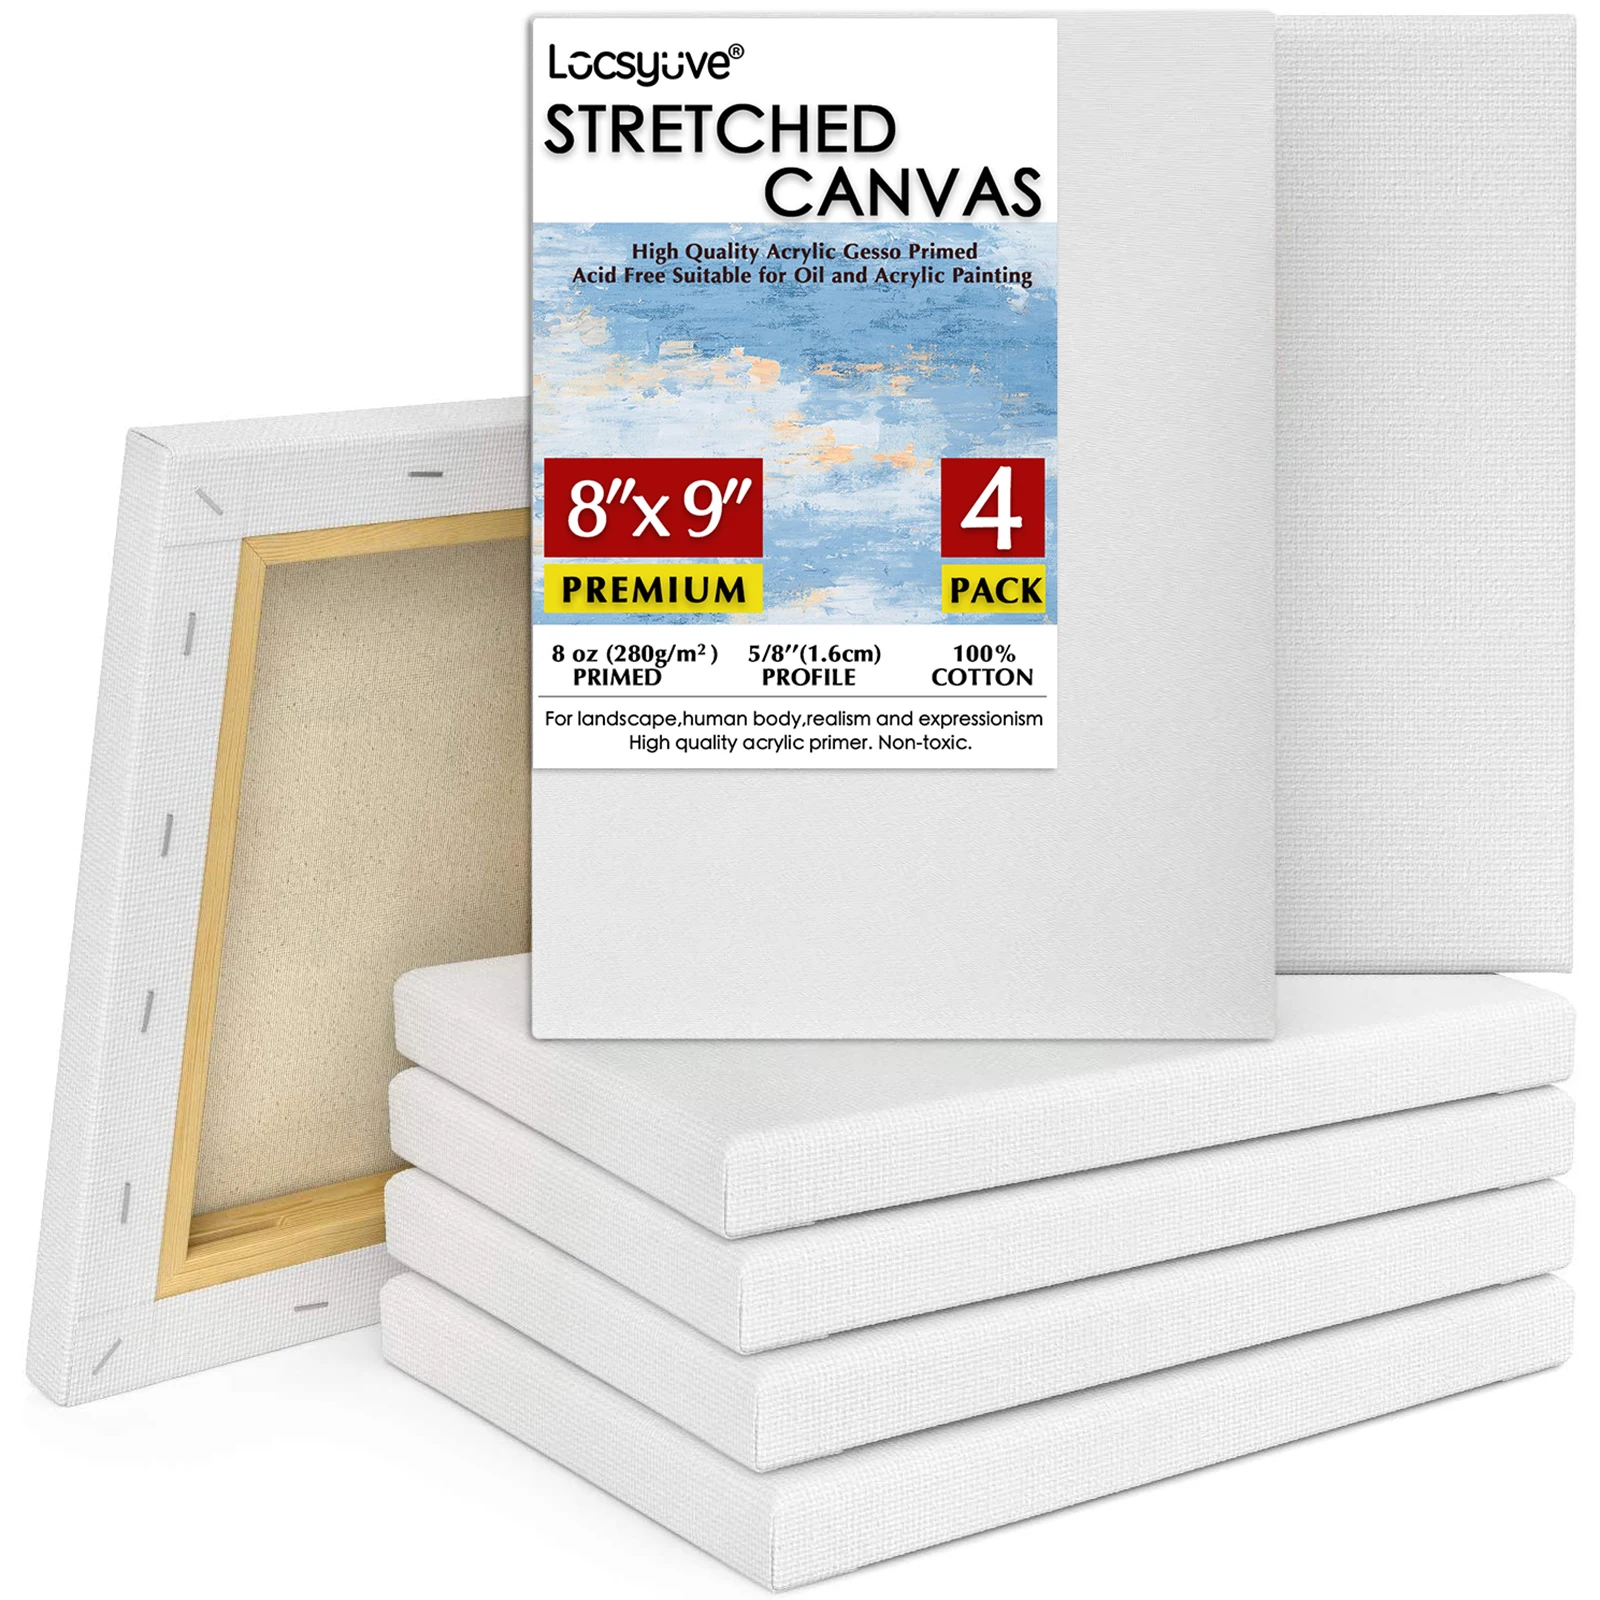 Locsyuve Stretched Canvas, Pack of 4, 8x8 Inches, Square White Canvas, 100%  Linen, 8 Oz